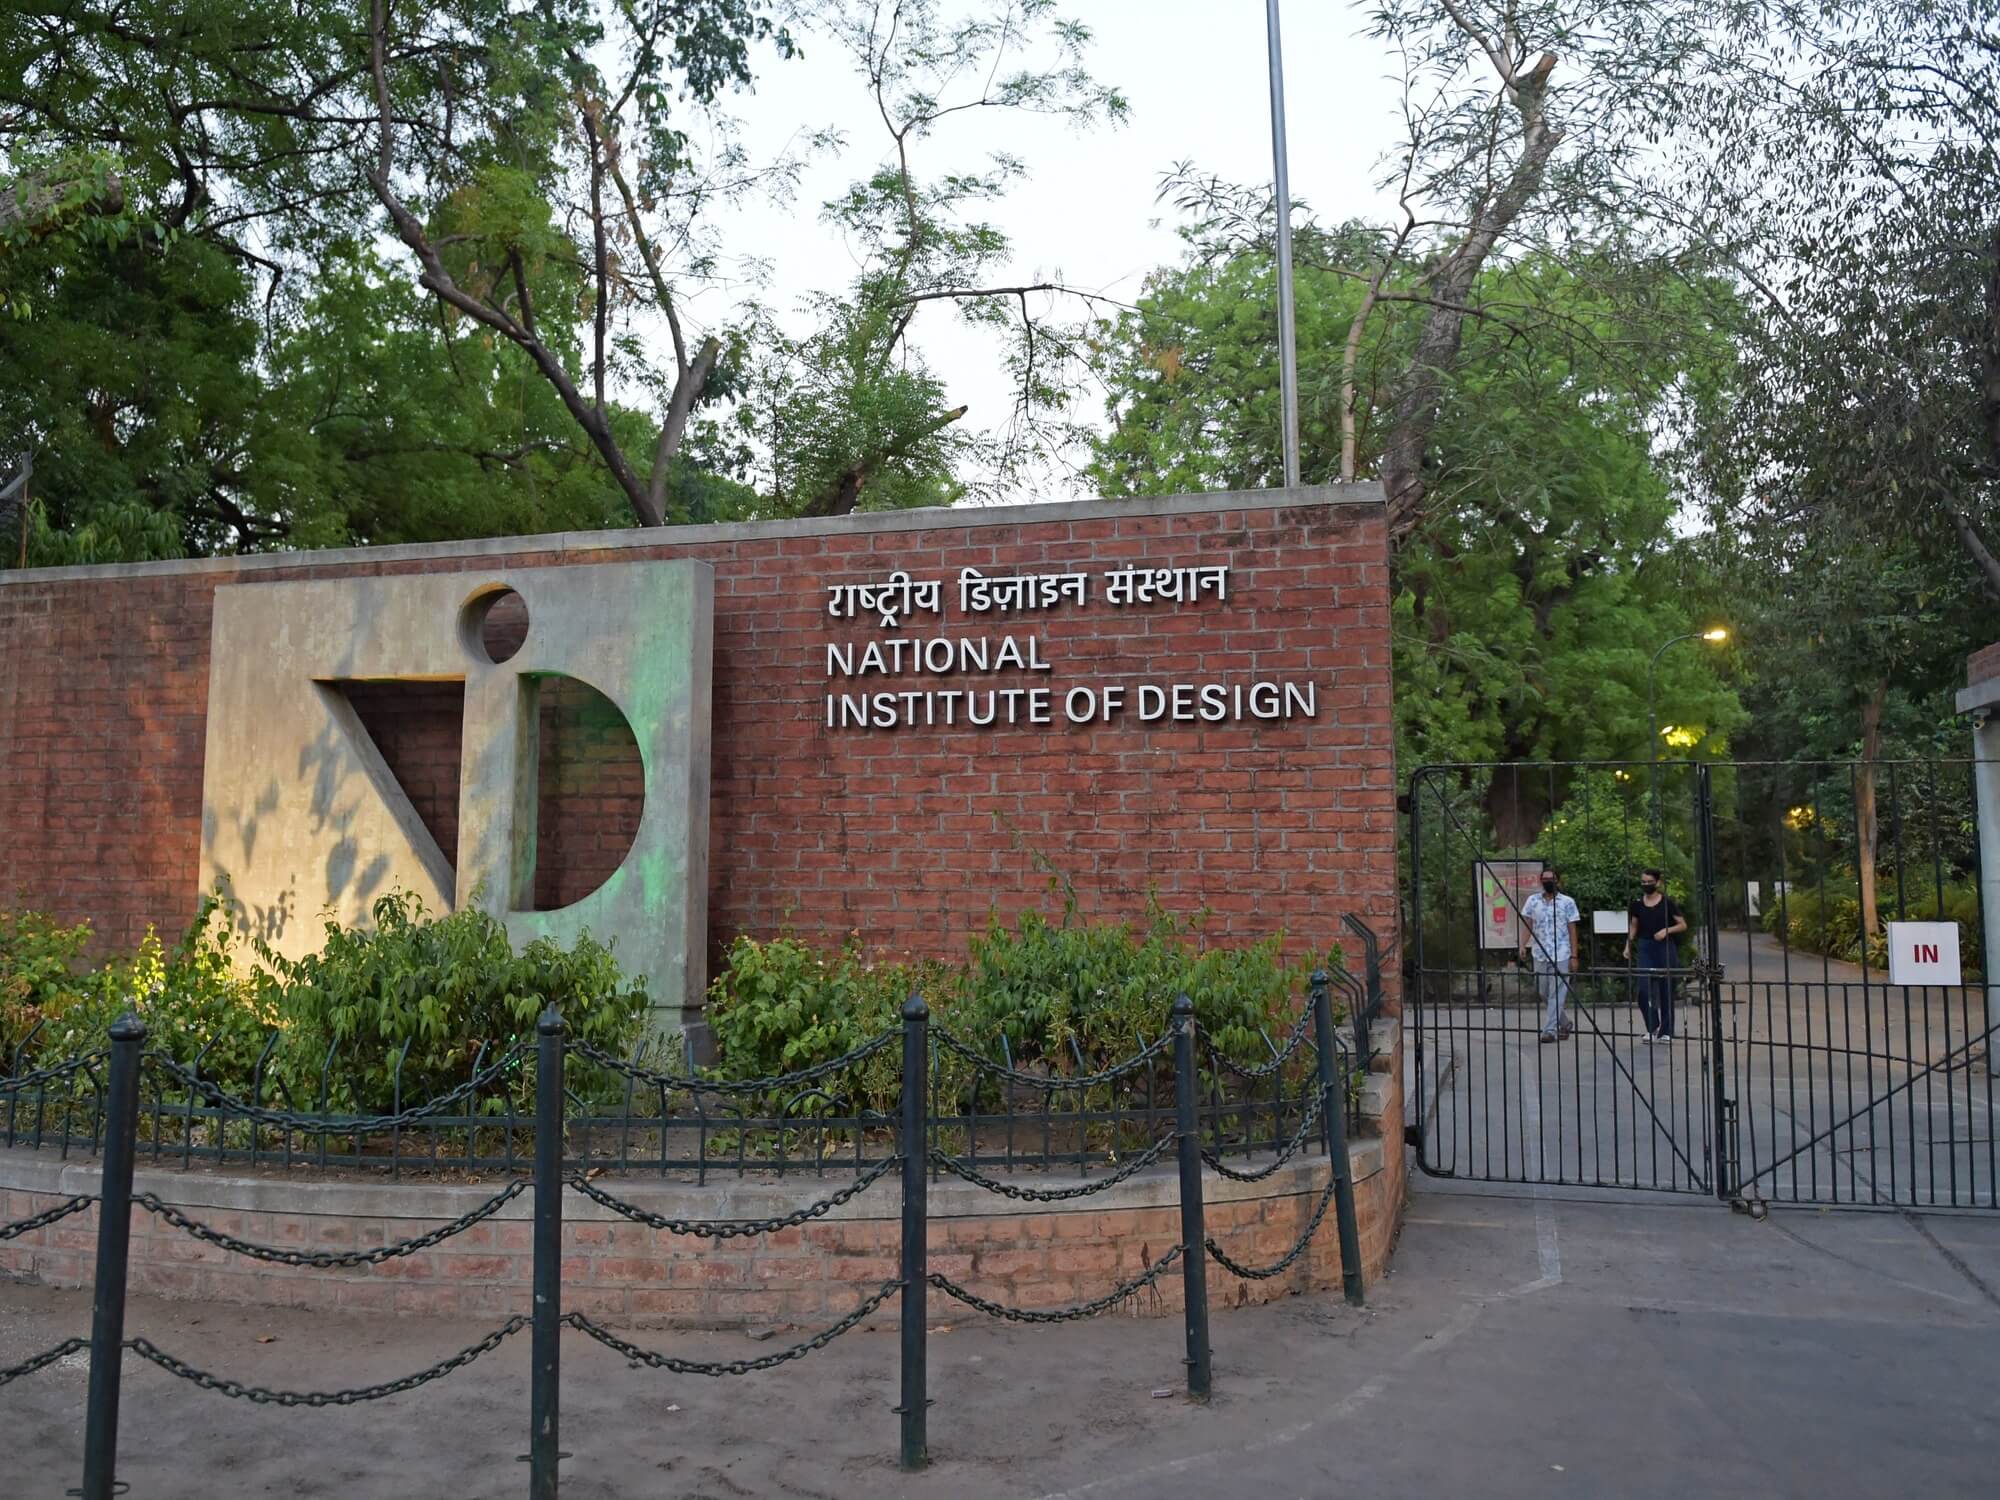 Entrance to the National Institute of Design, India